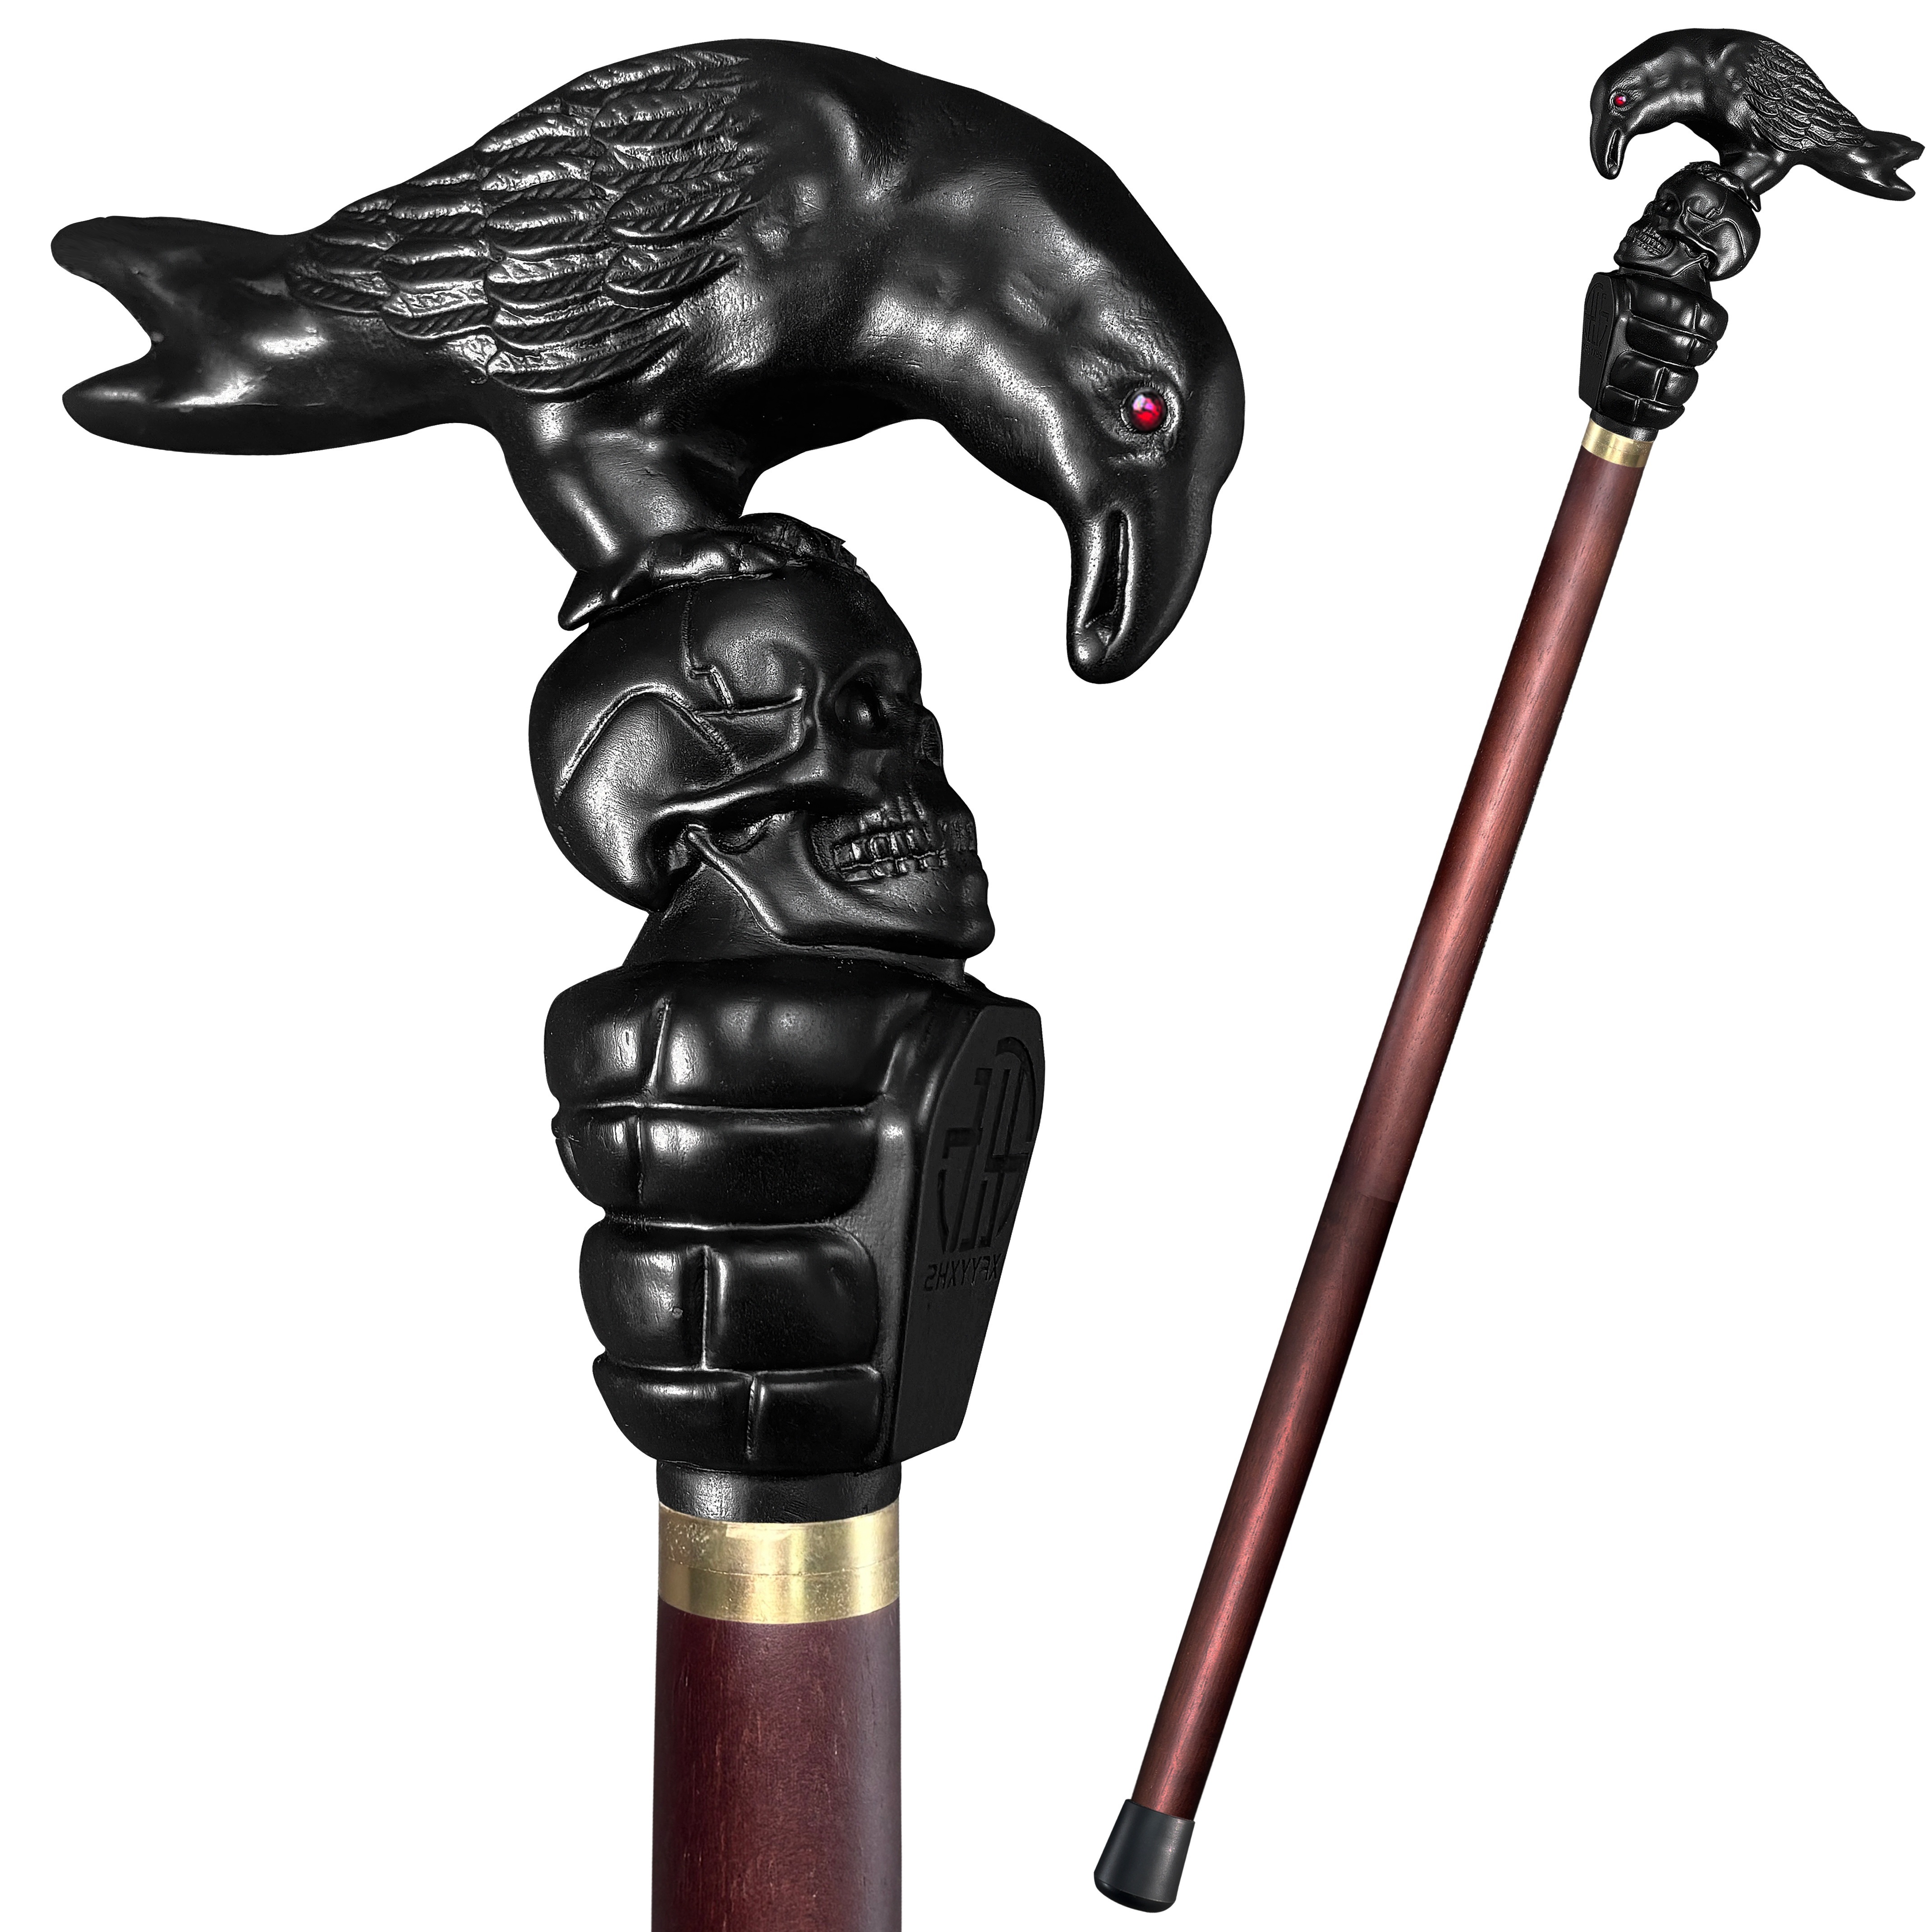 

Xfyyxhs-black Solid Wood Cane - Crow , Perfect Collection, Party Decoration, Gift For Father & Friend, Hand Carved From Wood